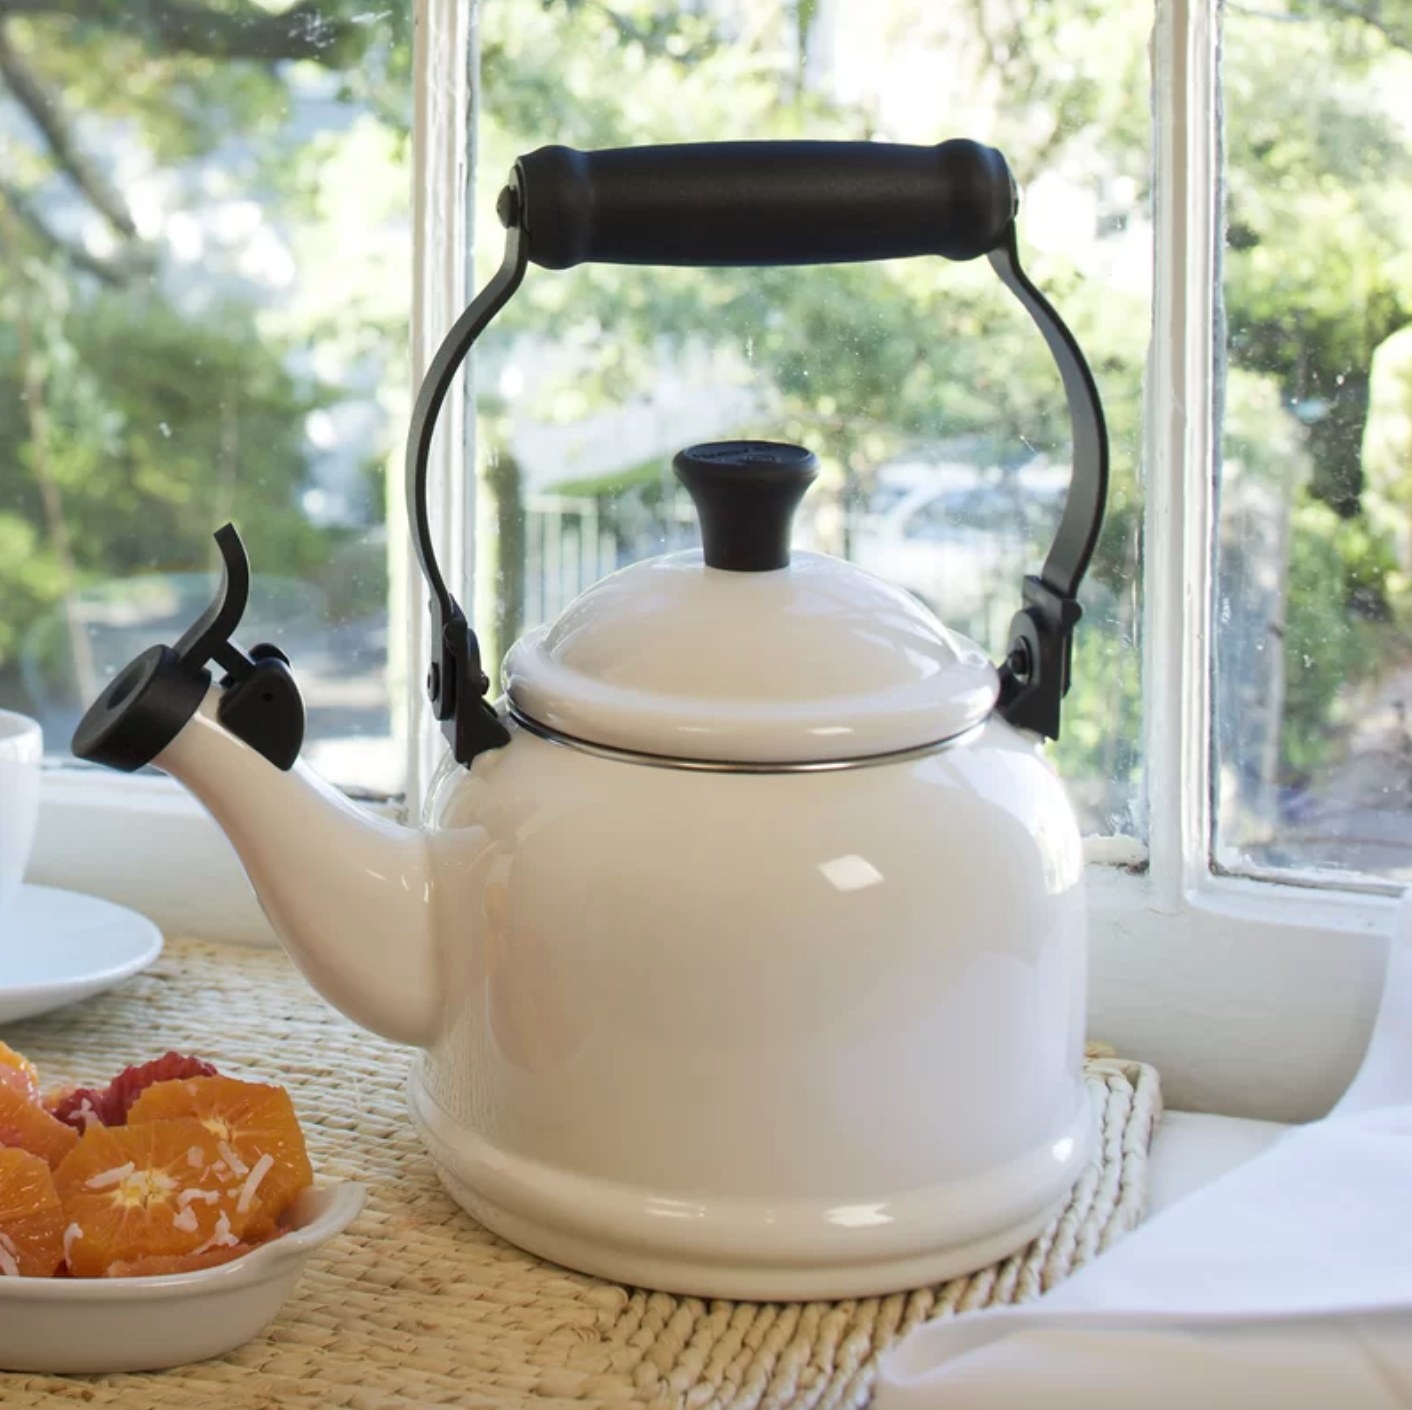 The Le Creuset teapot in white